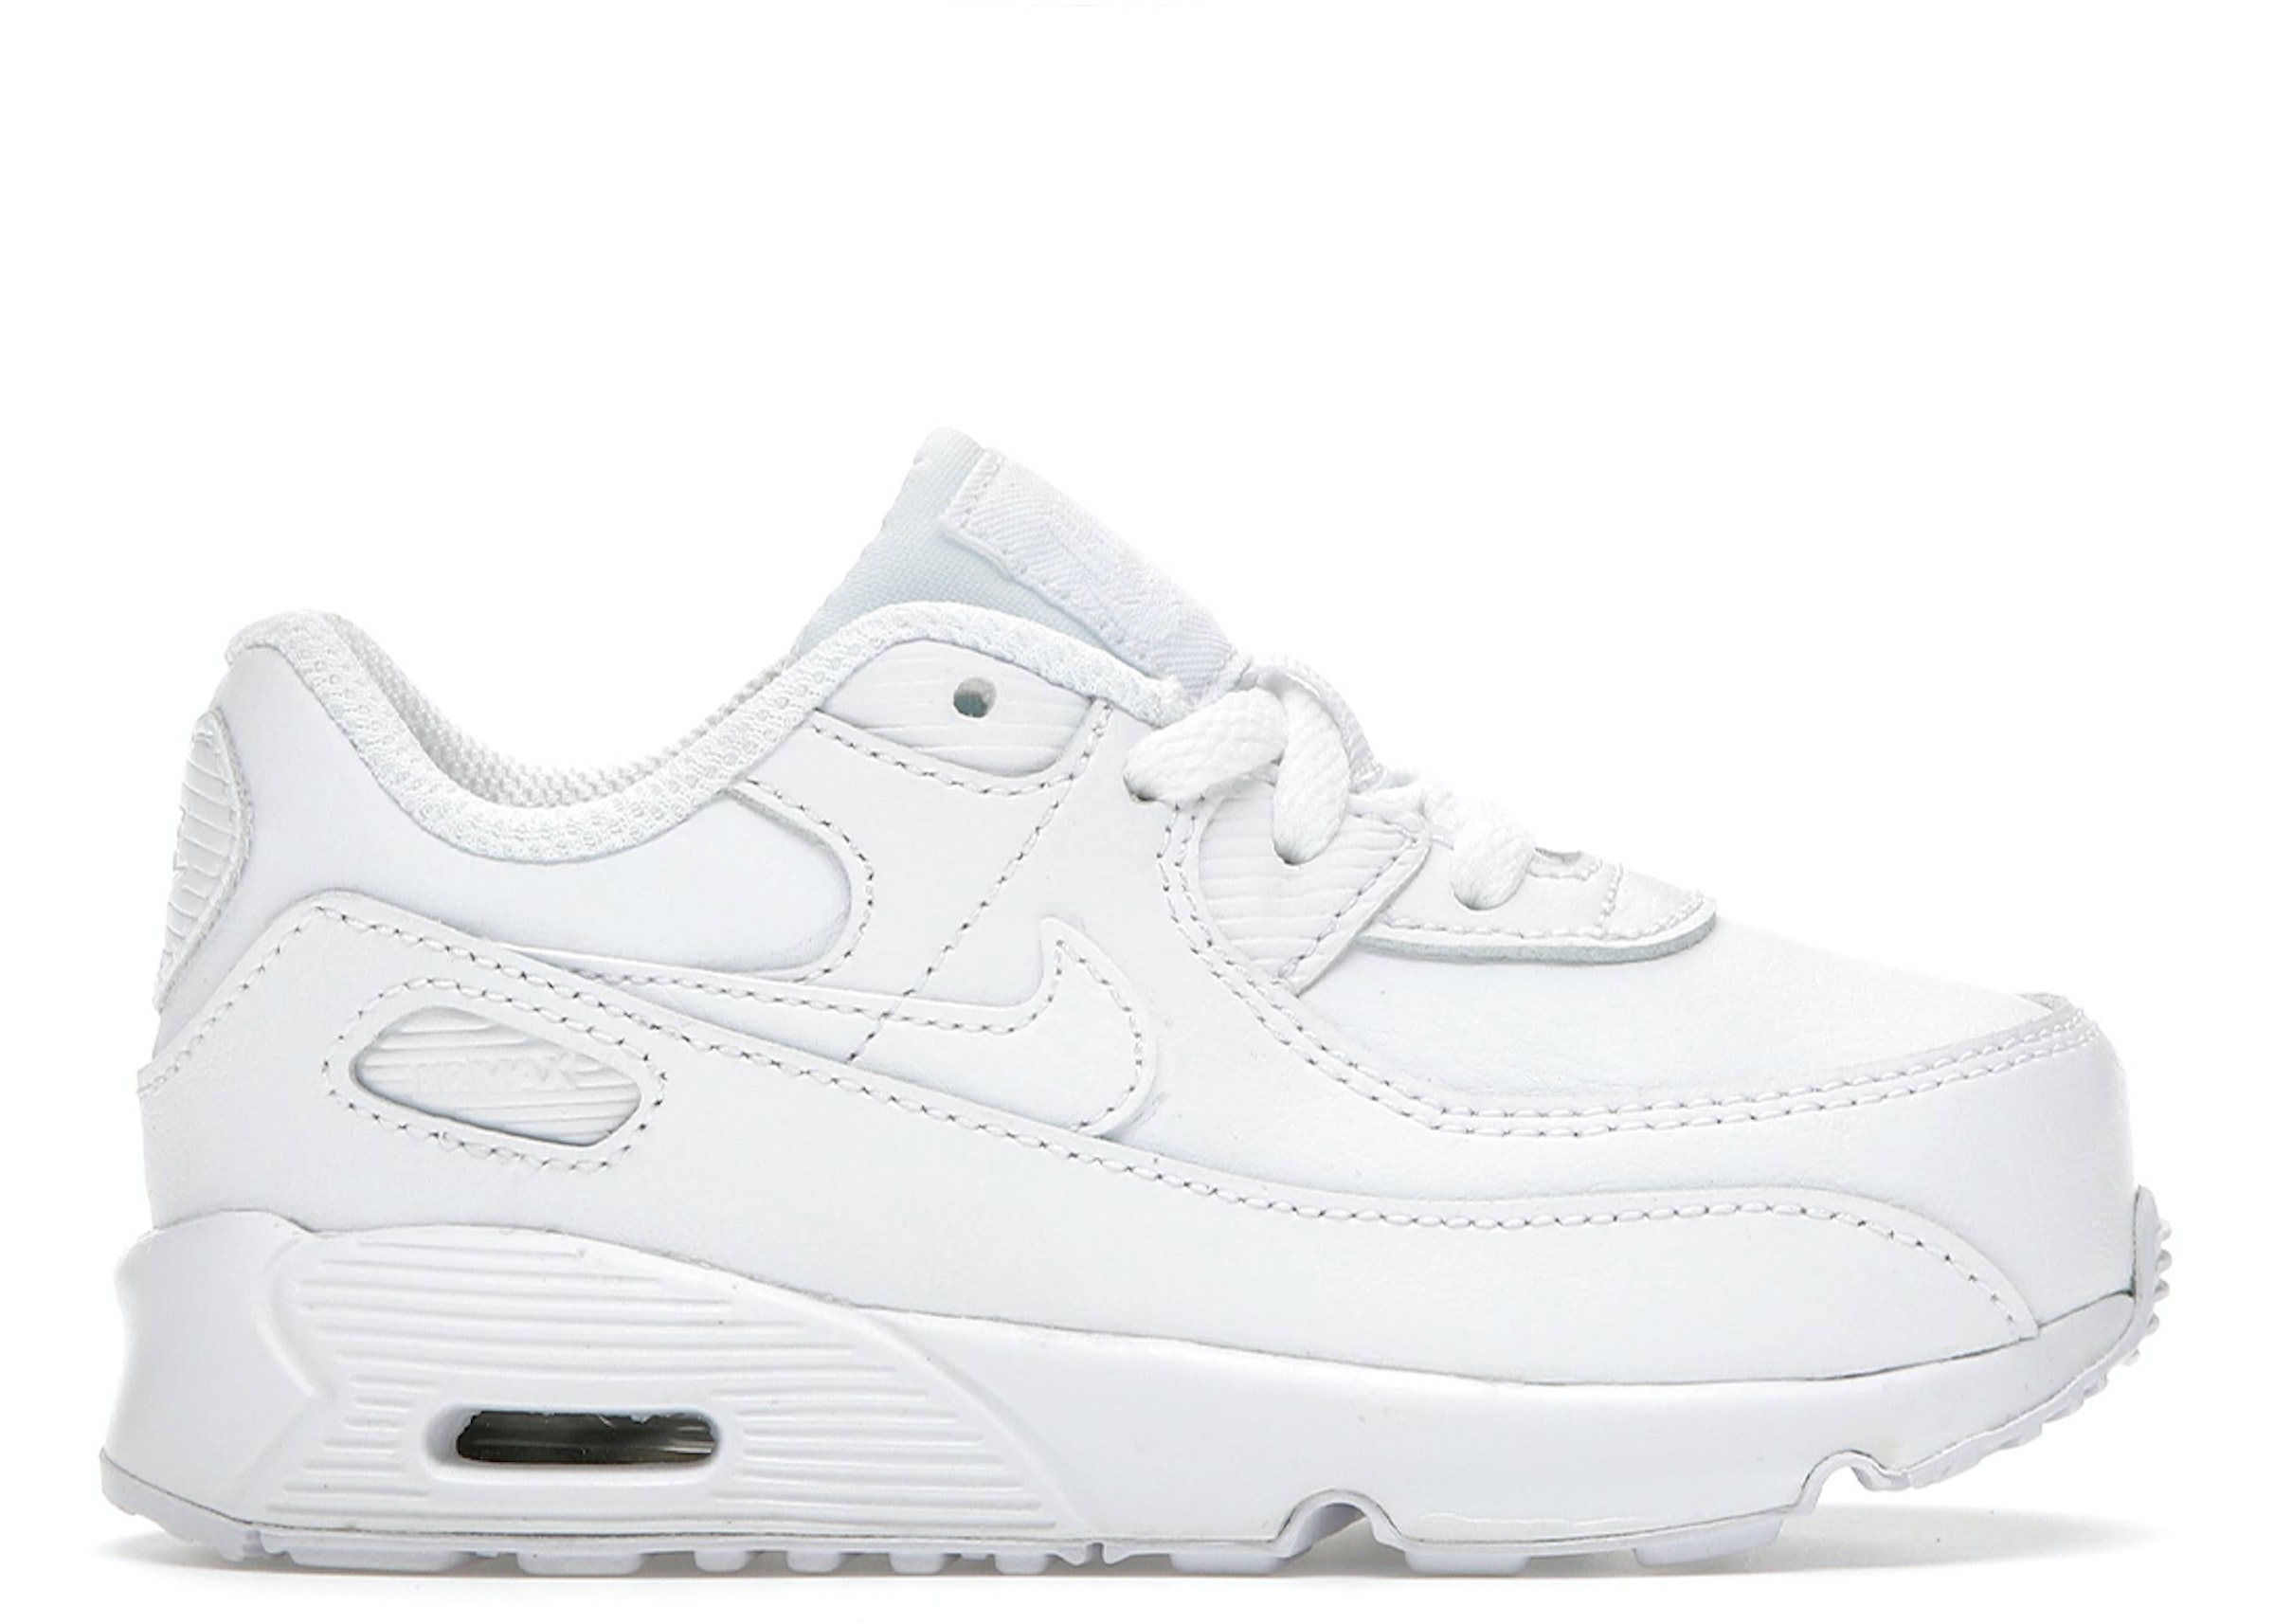 jefe Anunciante máscara Nike Air Max 90 Leather Triple White (TD) Toddler - CD6868-100 - US